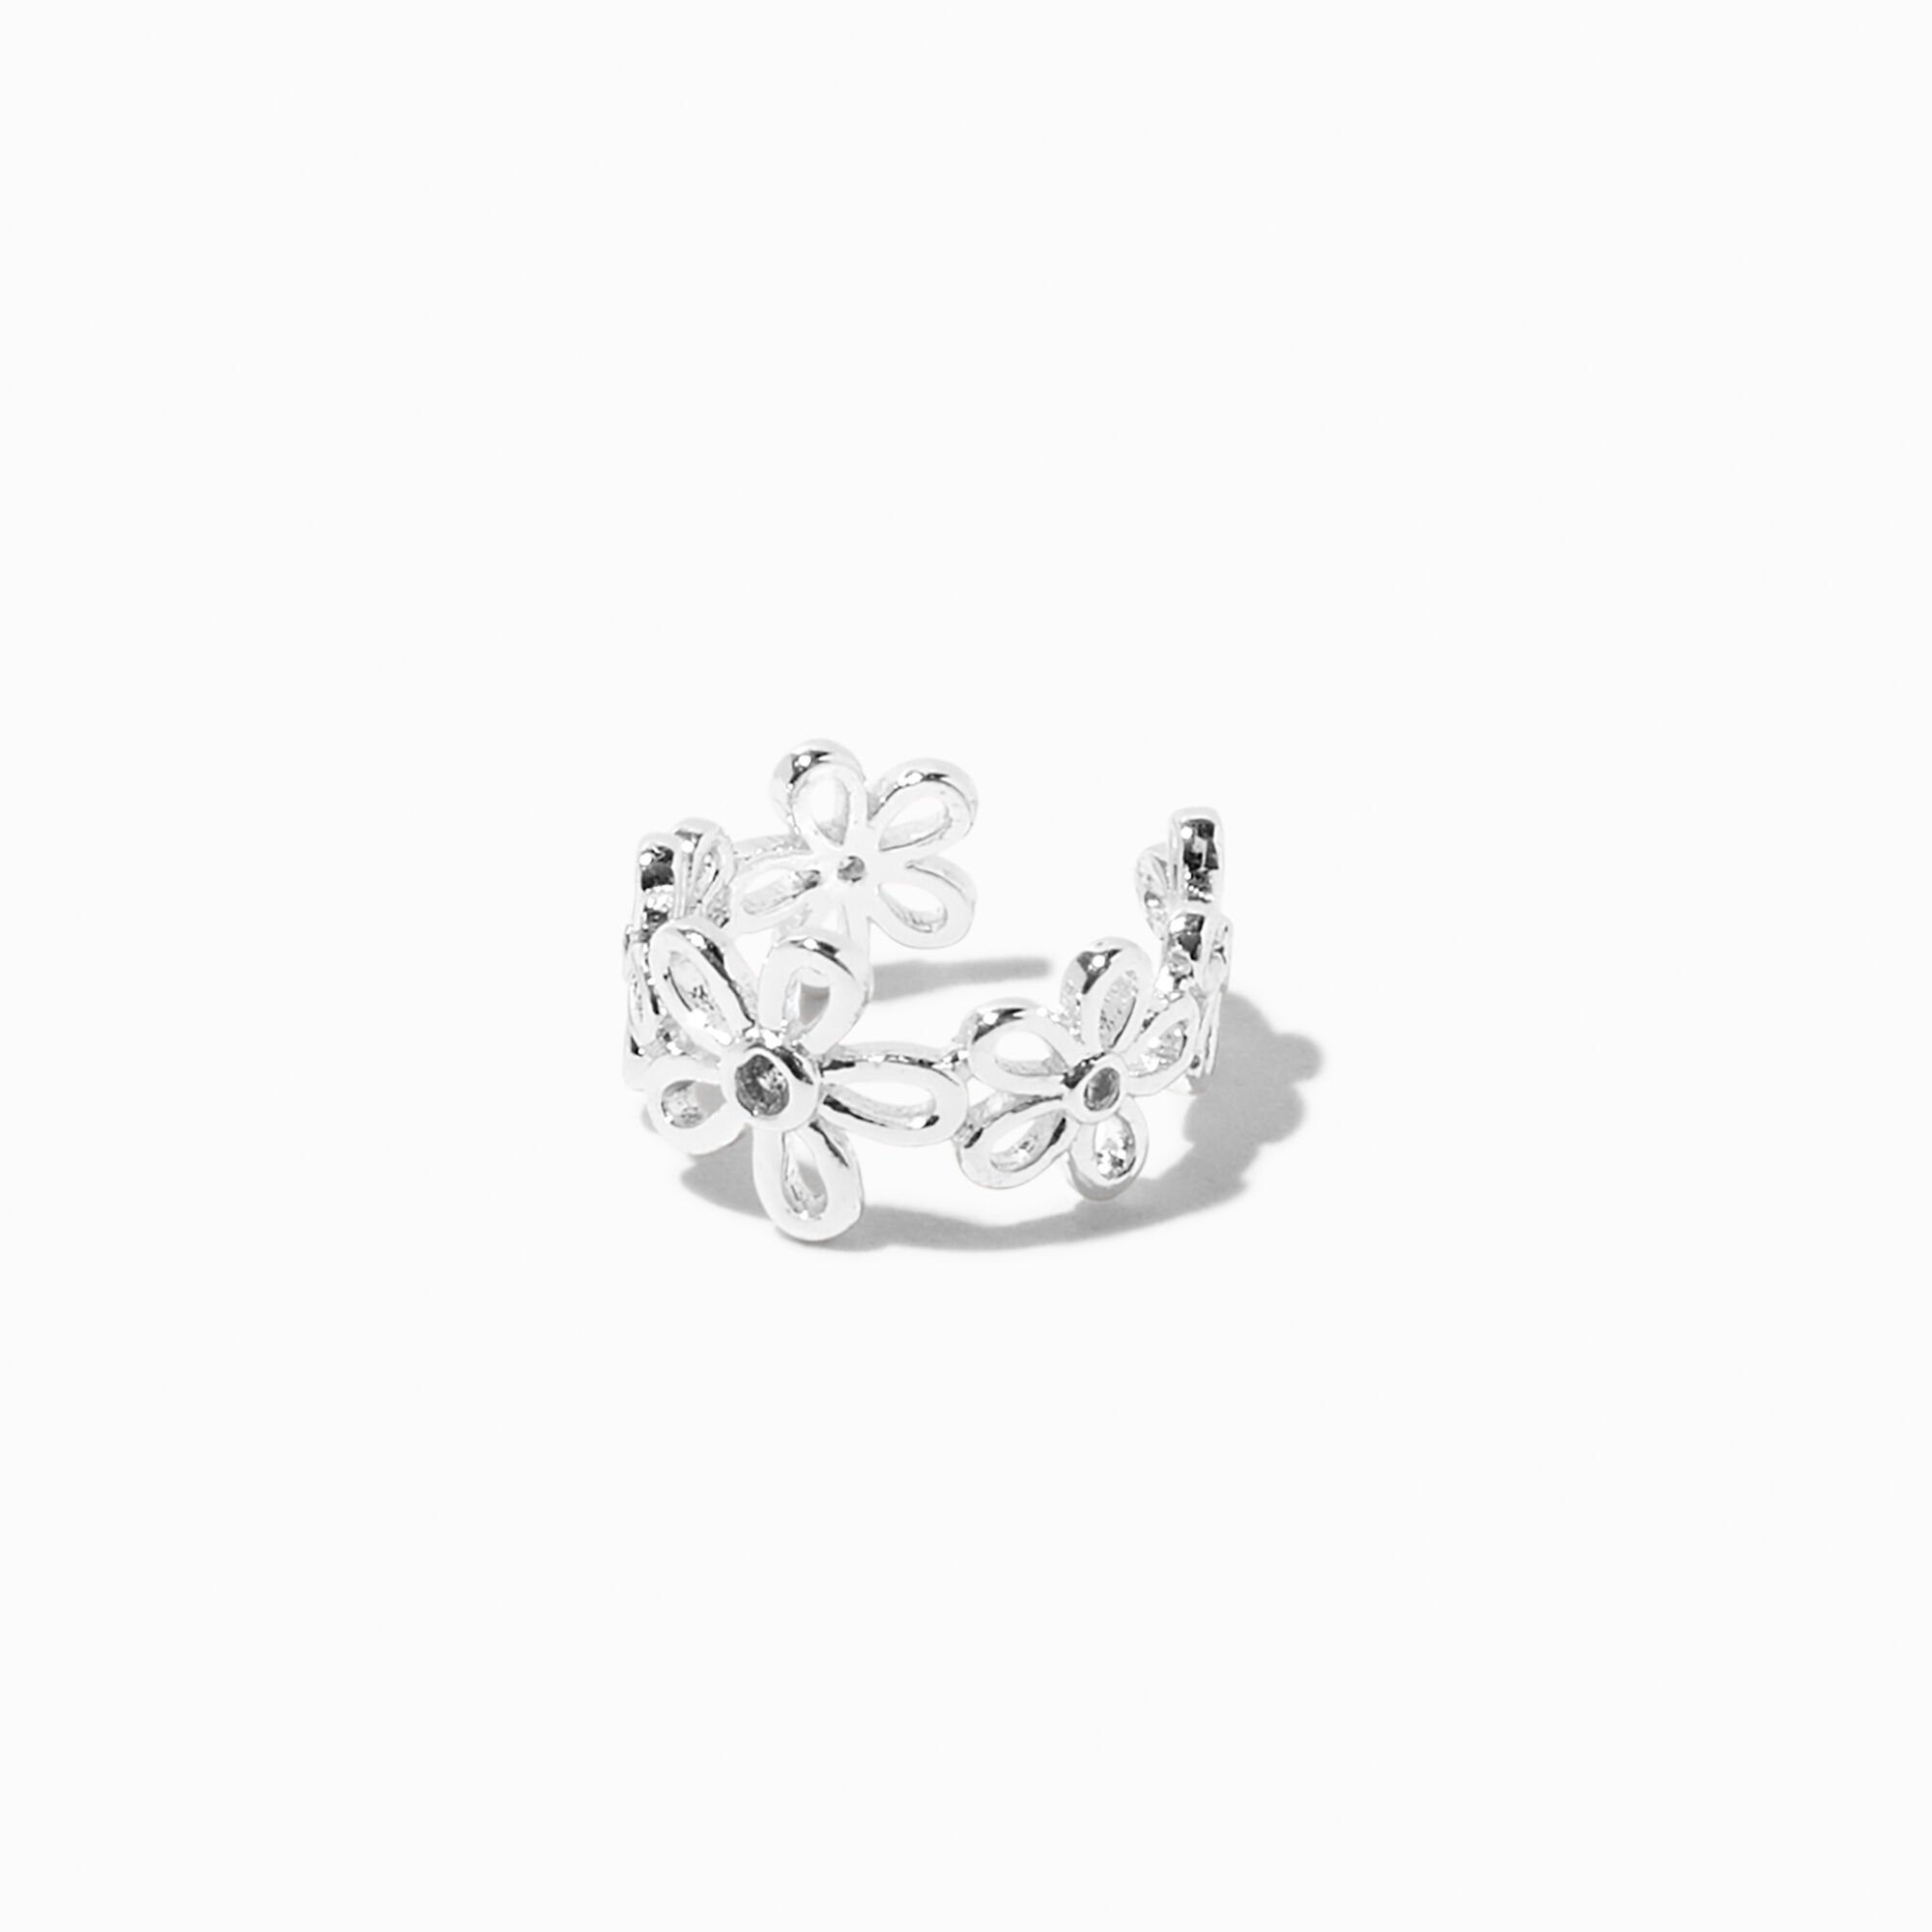 View Claires Tone Embellished Daisy Ear Cuff Silver information